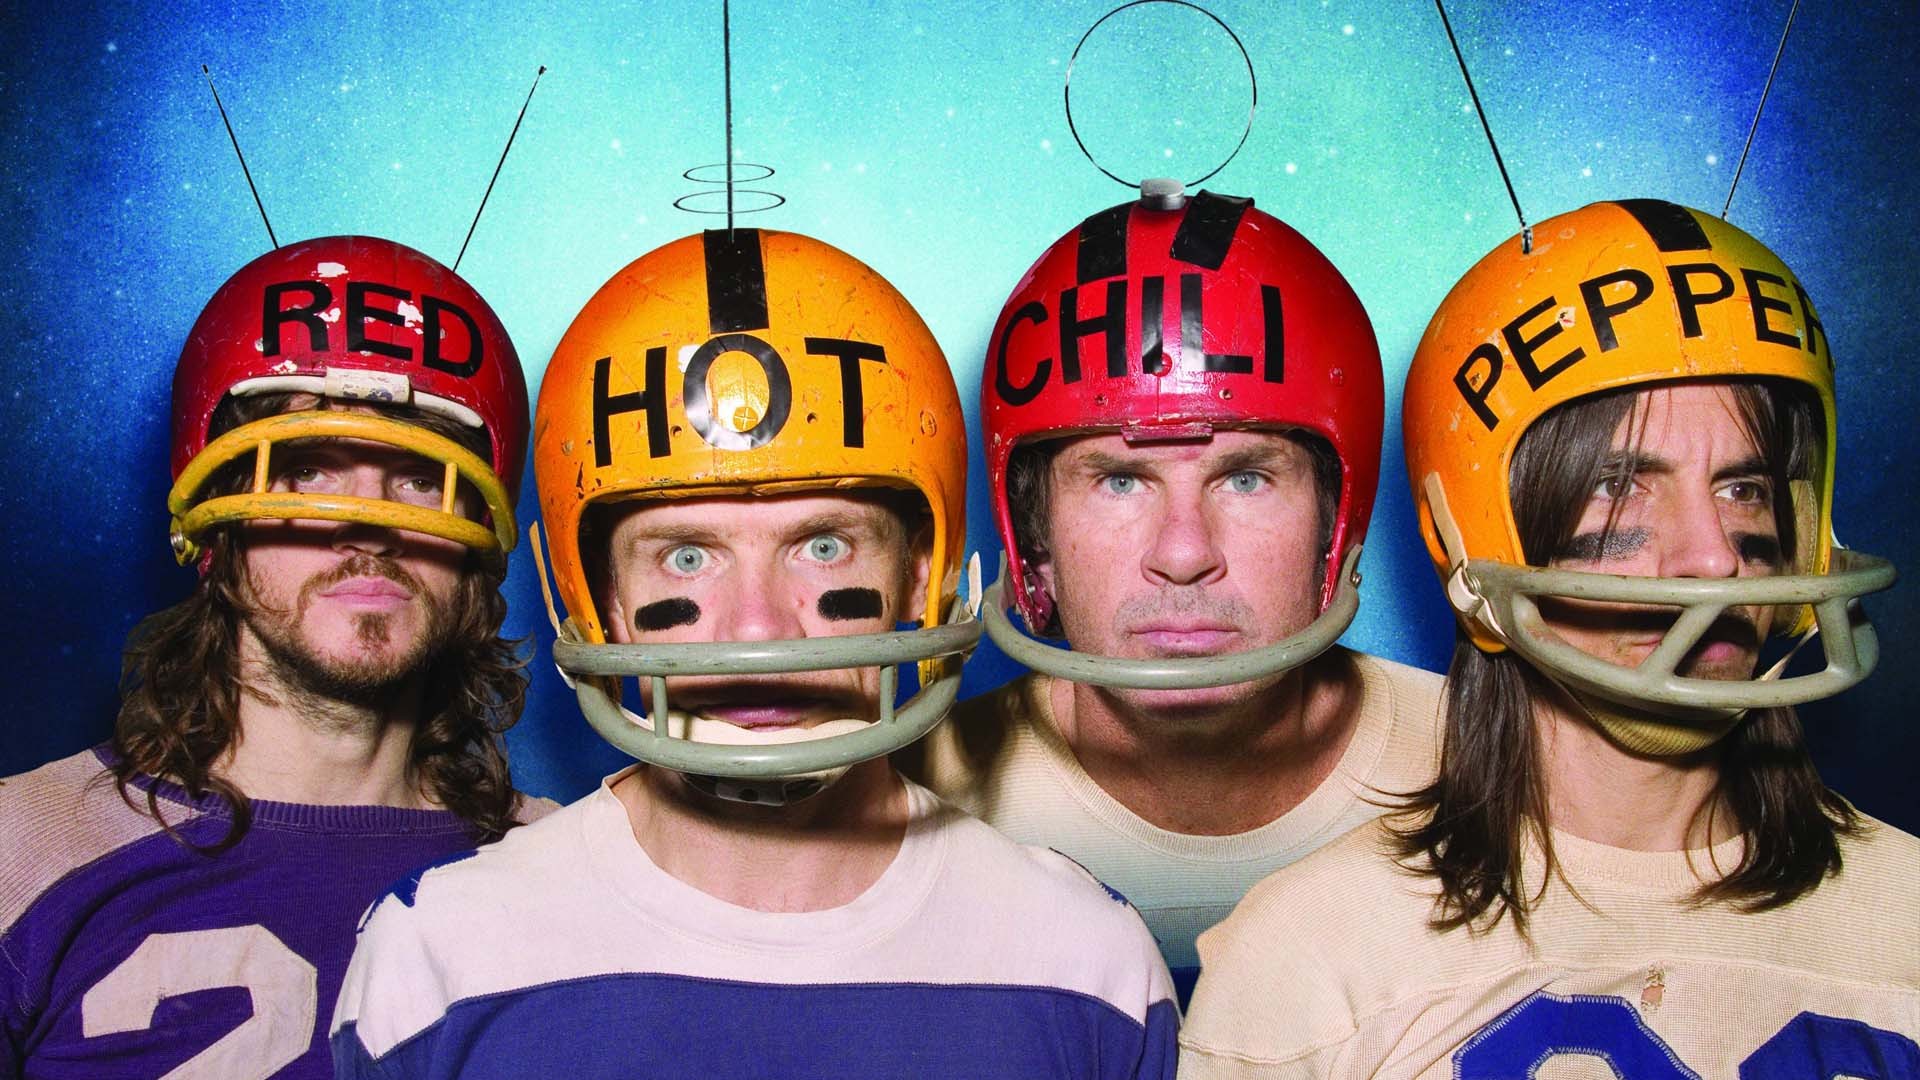 Red Hot Chili Peppers, Helmet, Rock Bands Wallpaper